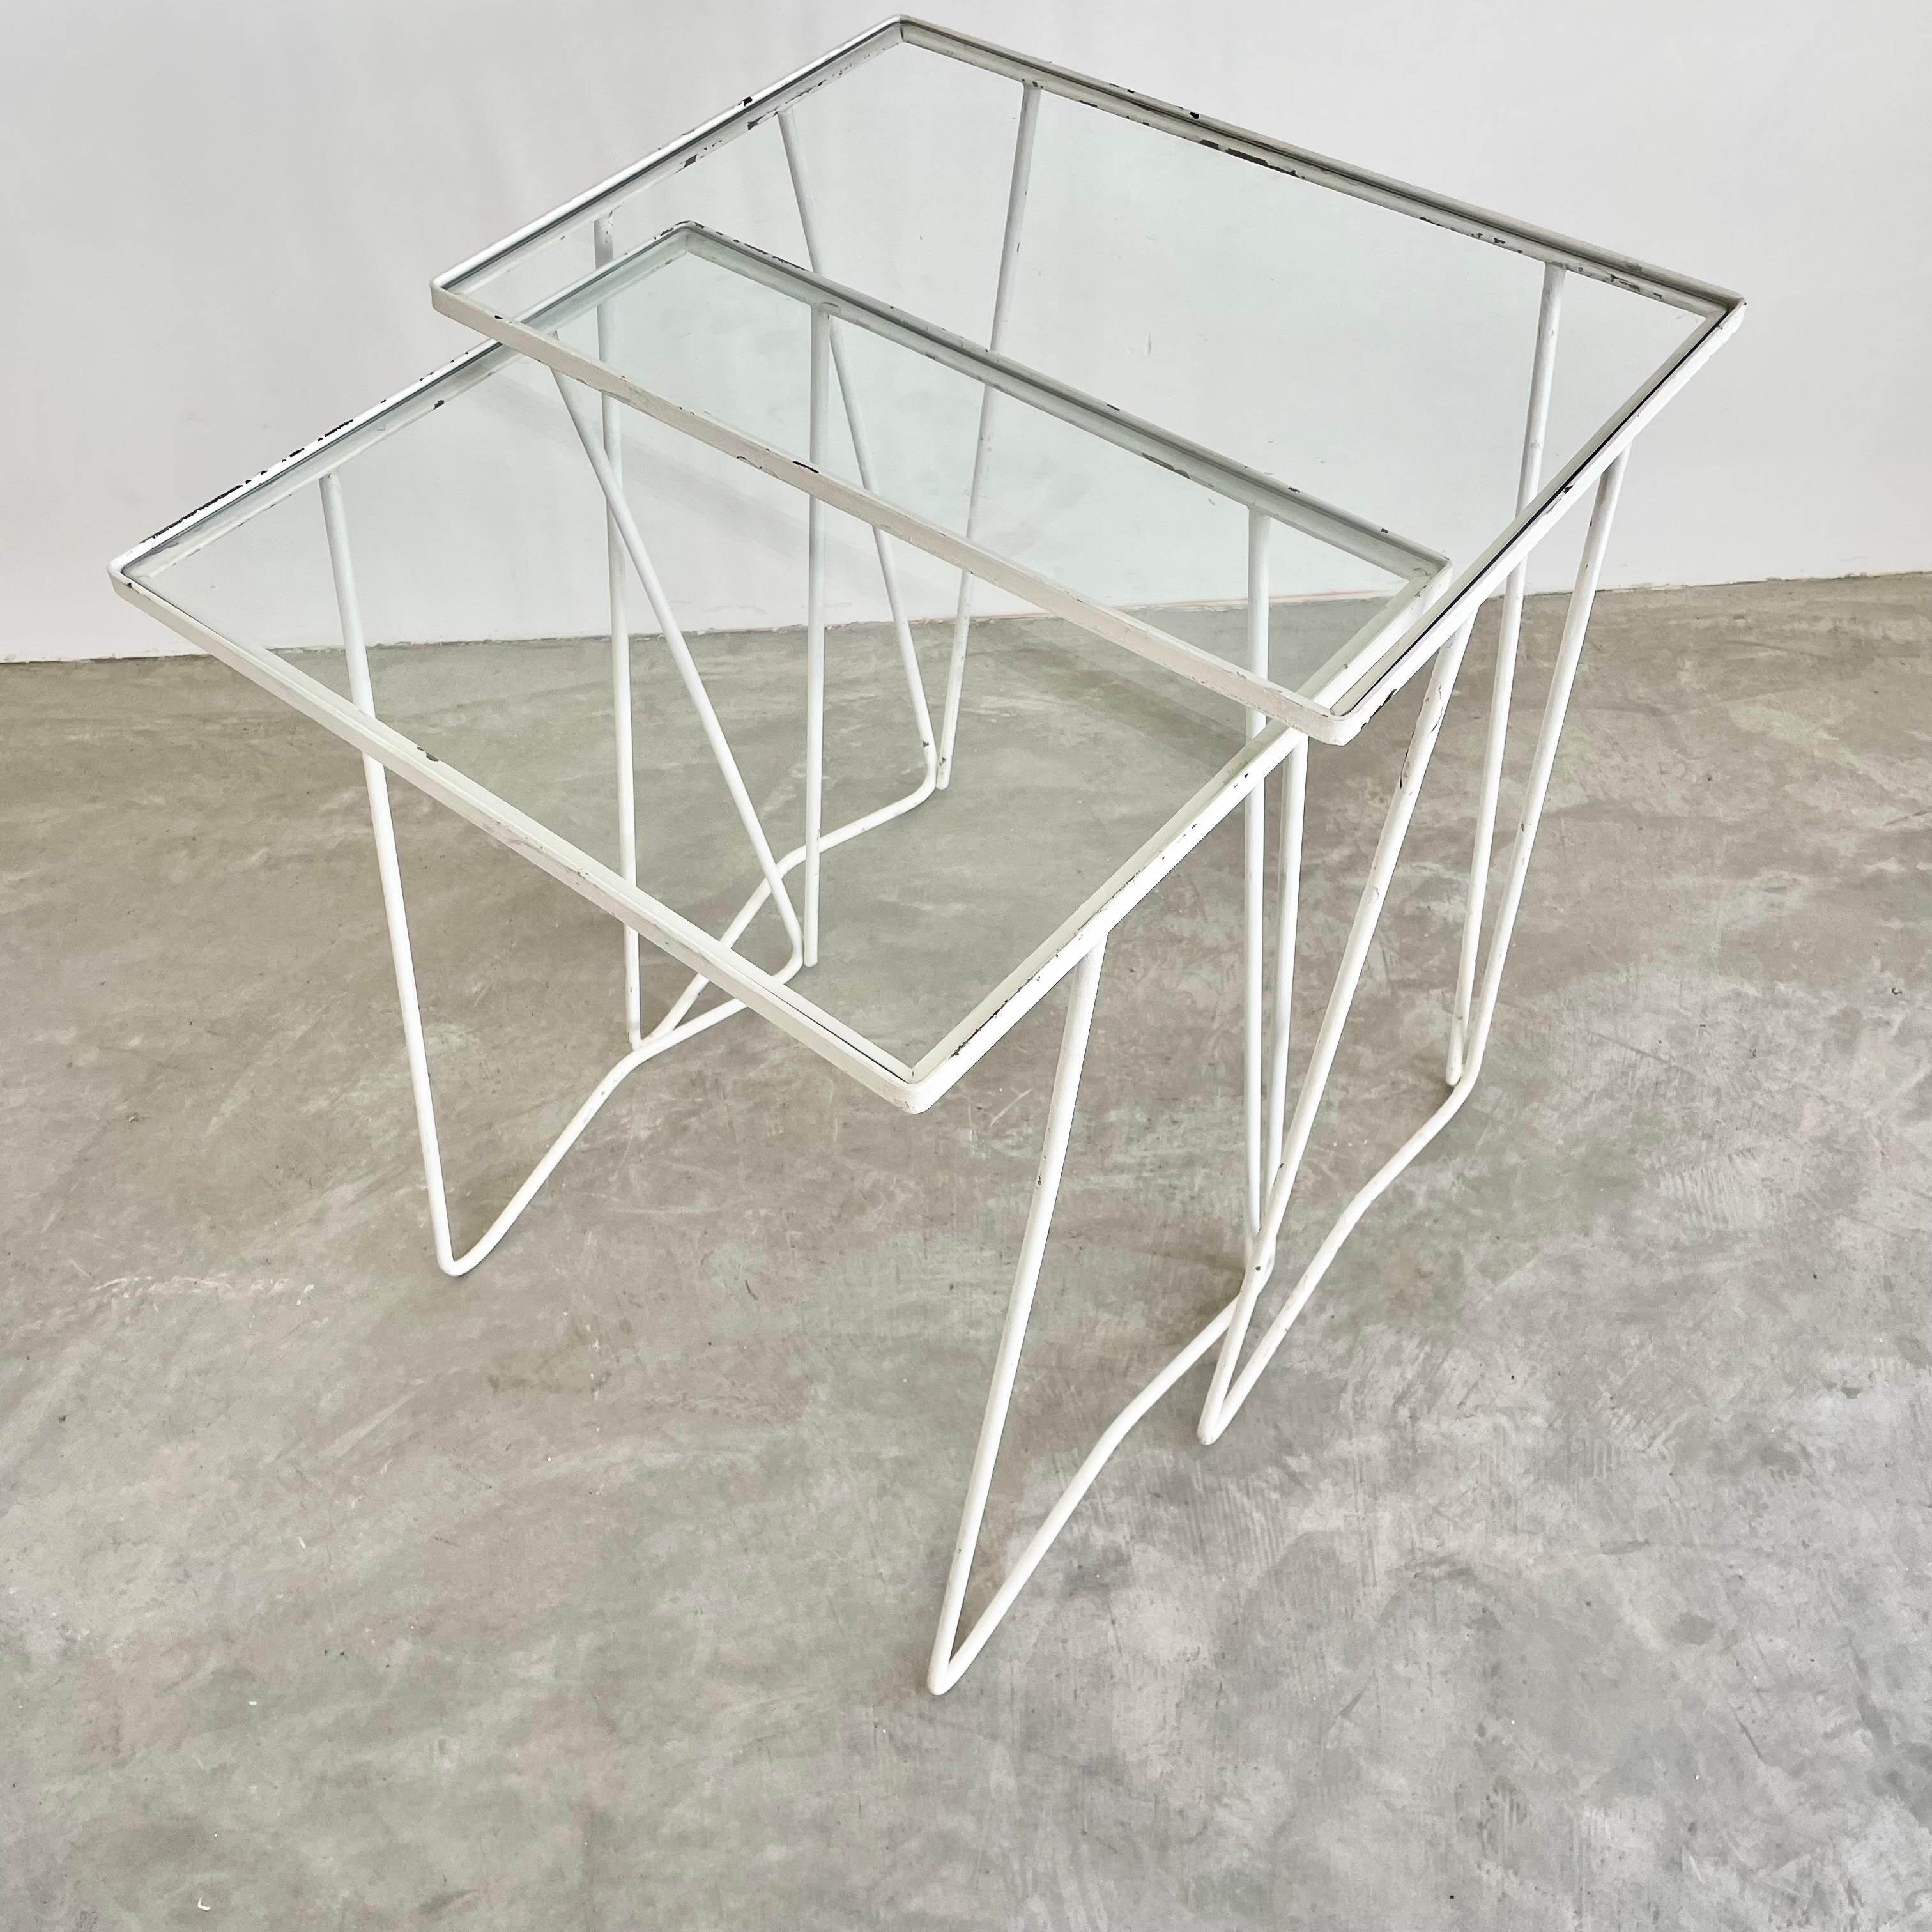 Pair of Iron and Glass Nesting Tables, 1970s USA For Sale 6